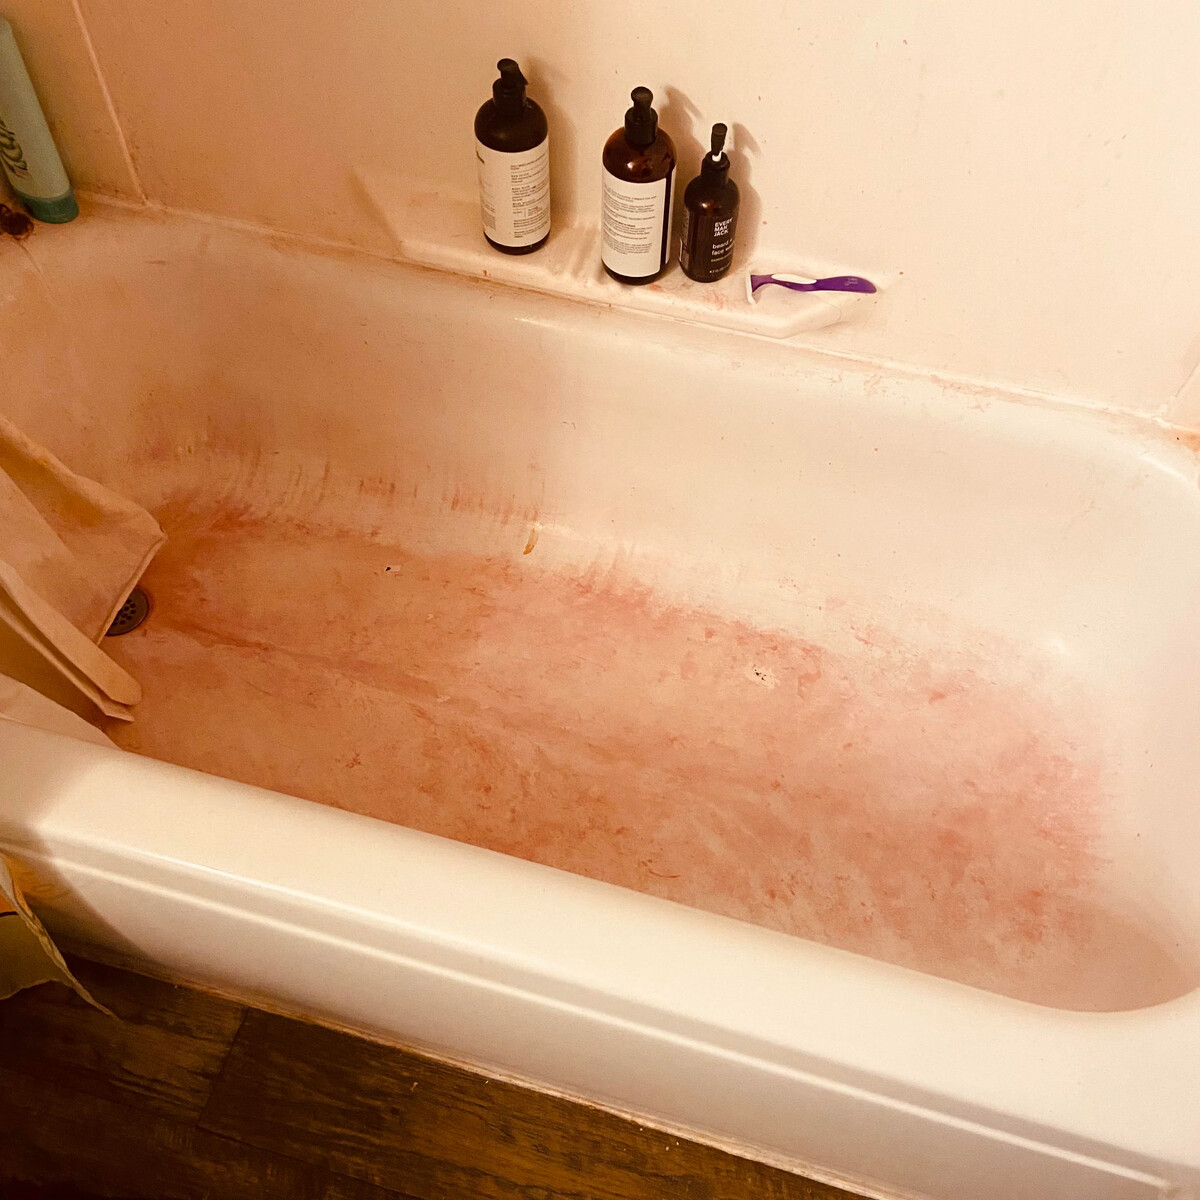 How To Not Stain Your Bathtub With Hair Dye